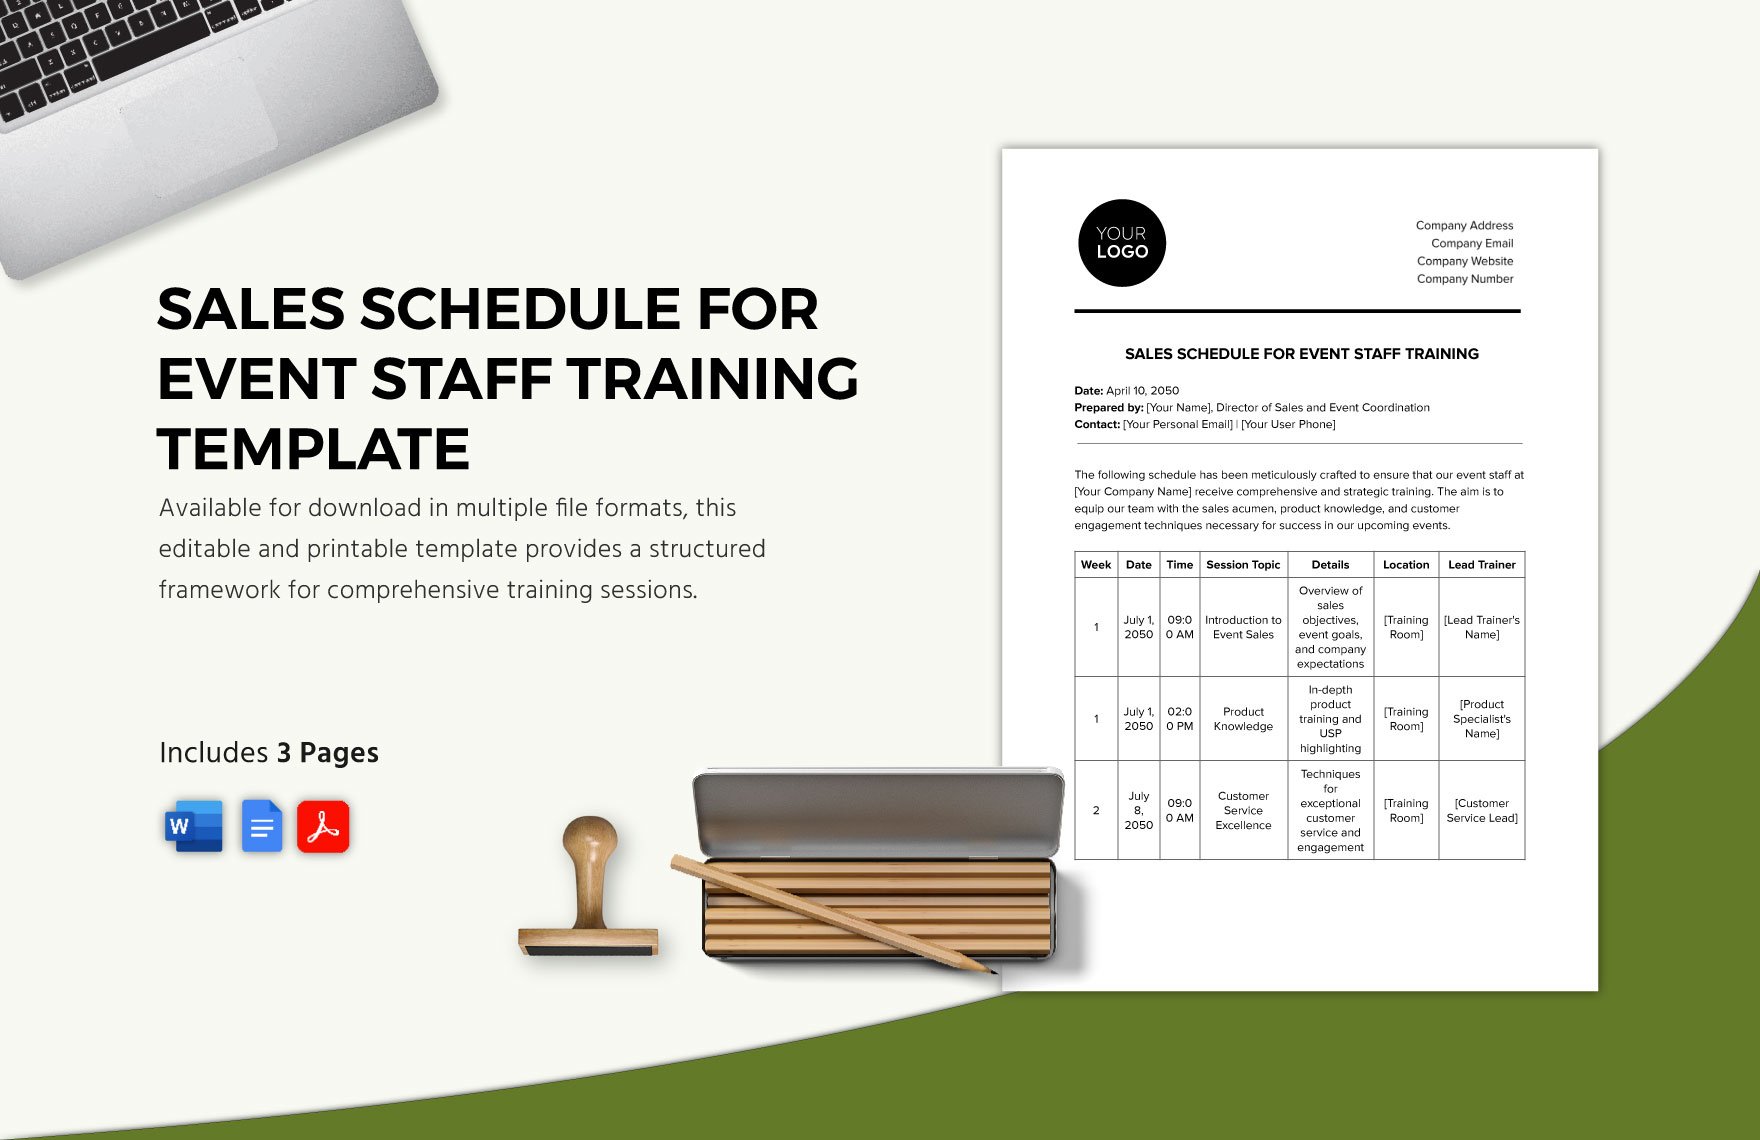 Sales Schedule for Event Staff Training Template in Word, Google Docs, PDF